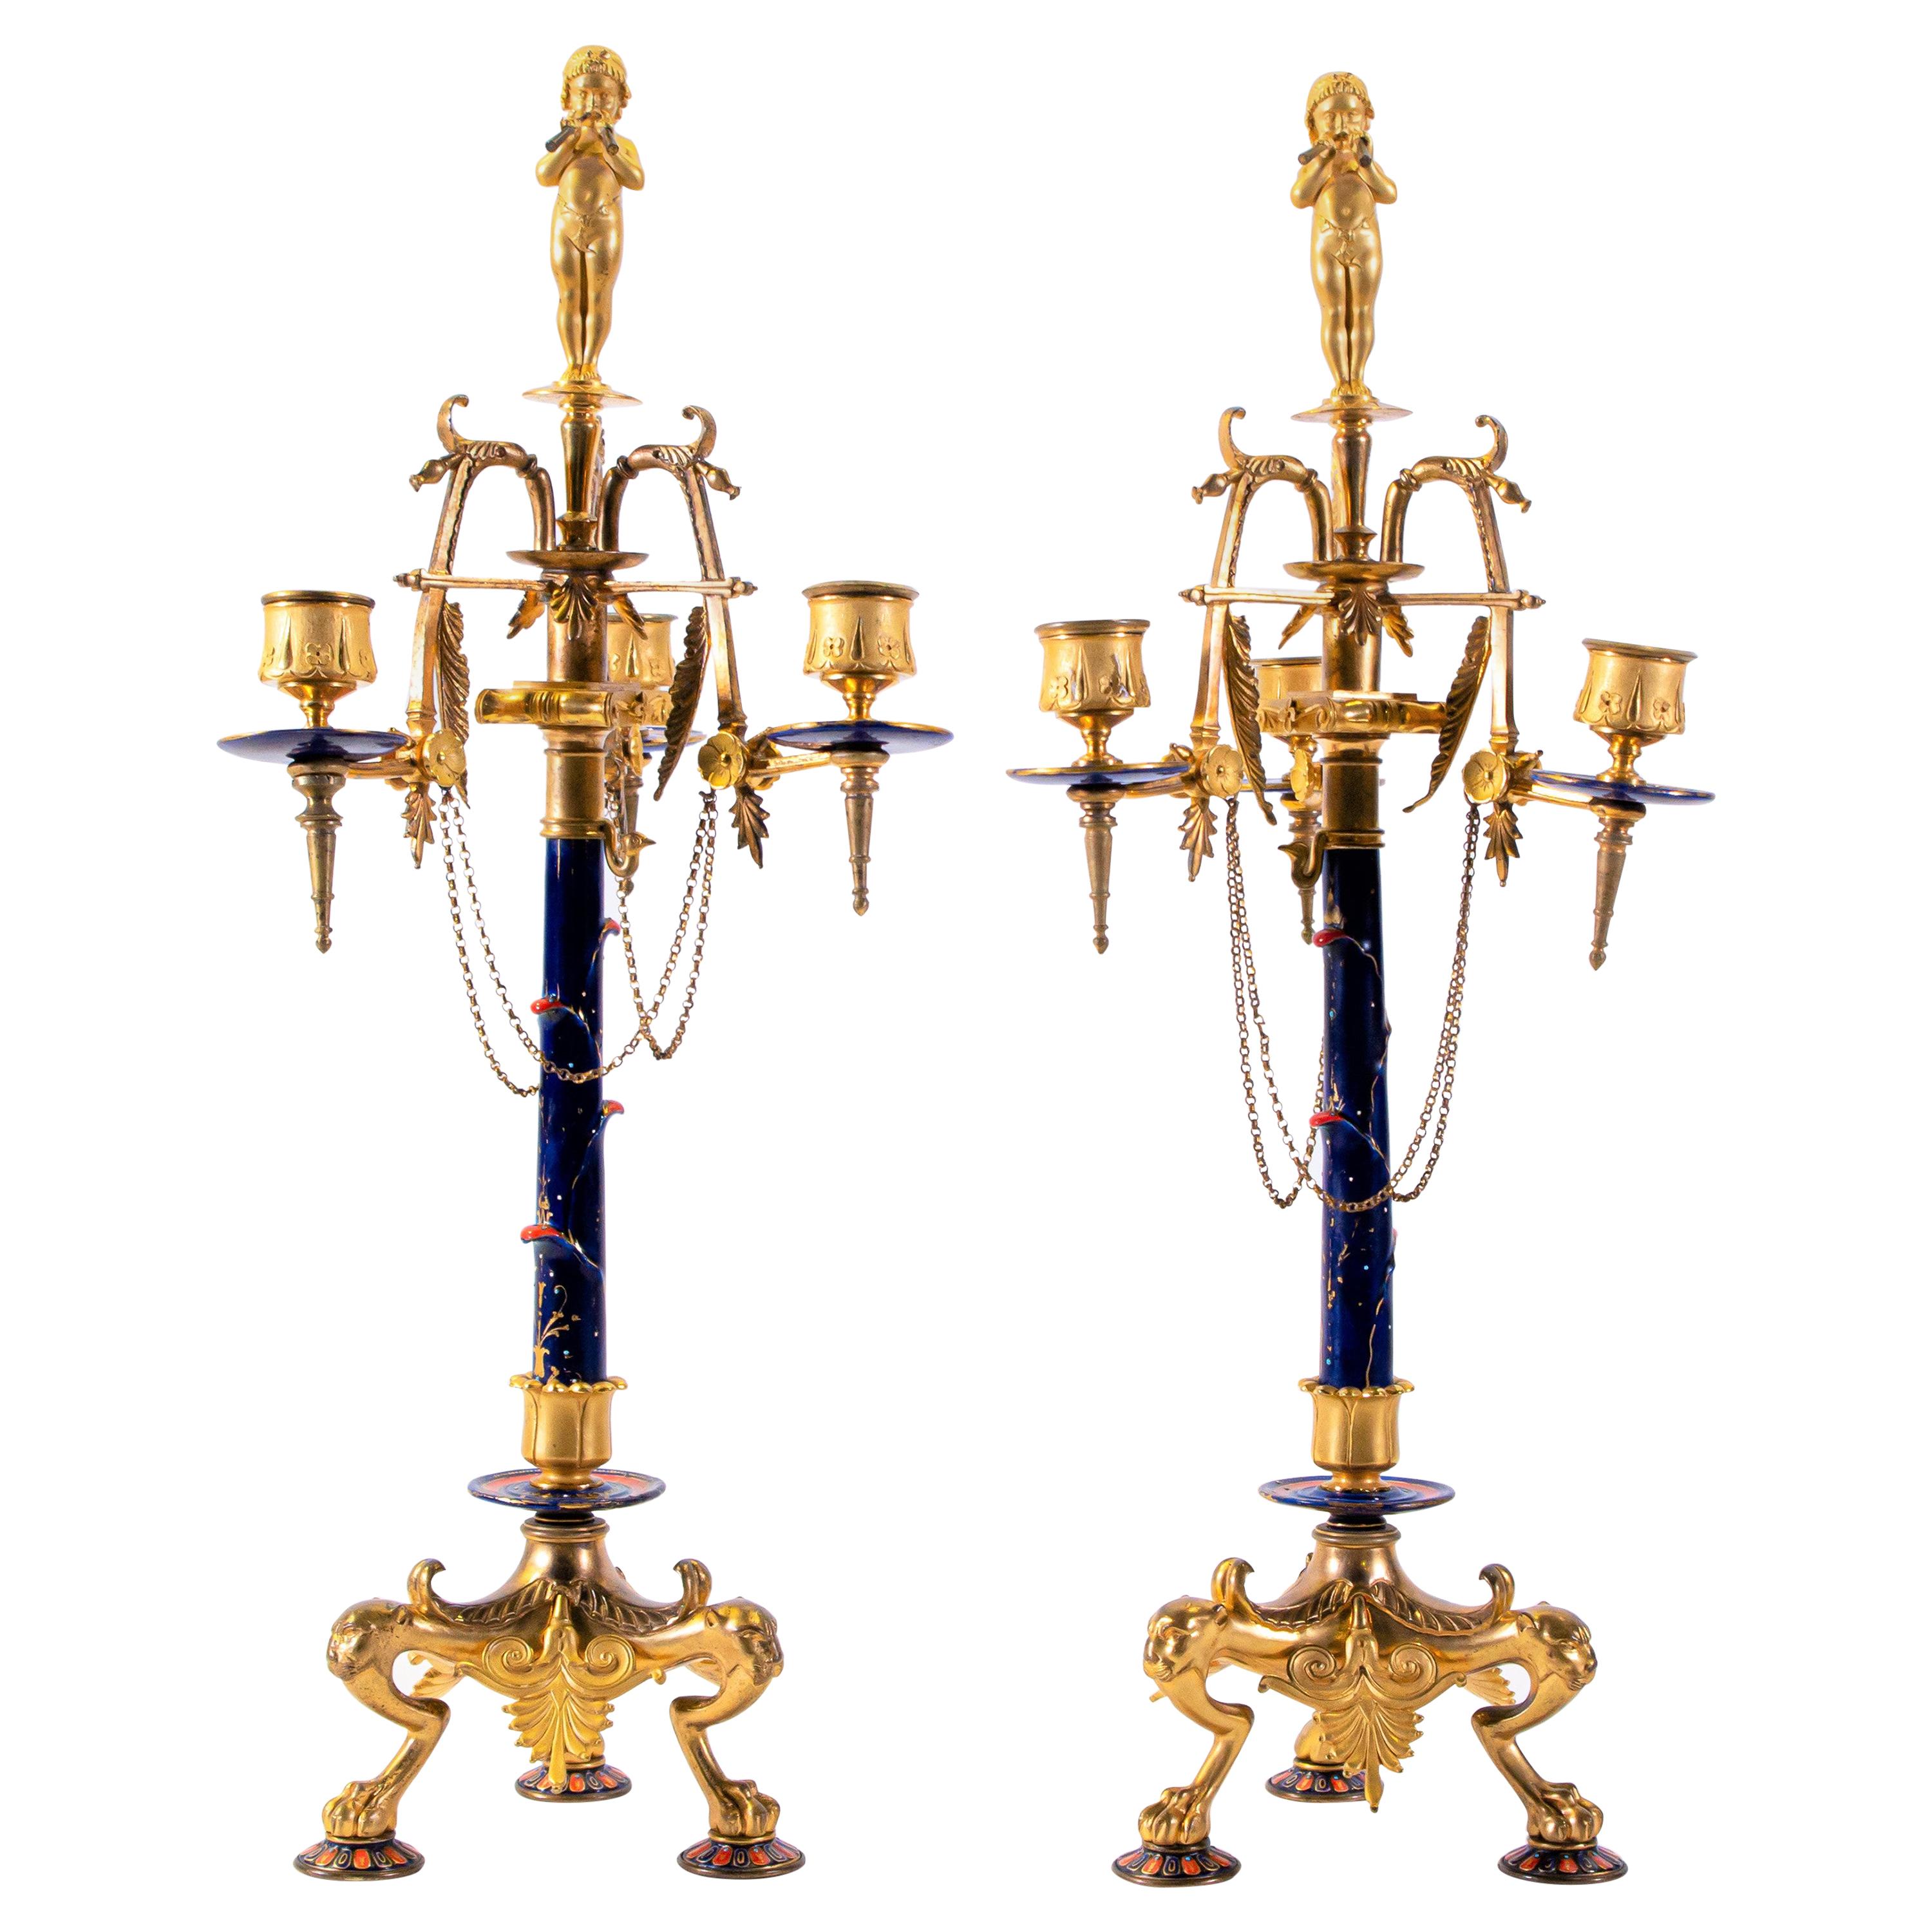 Pair of Neo-Grec Style 3-Arm Dore Bronze and Enamel Candelabras, F. Levillain For Sale